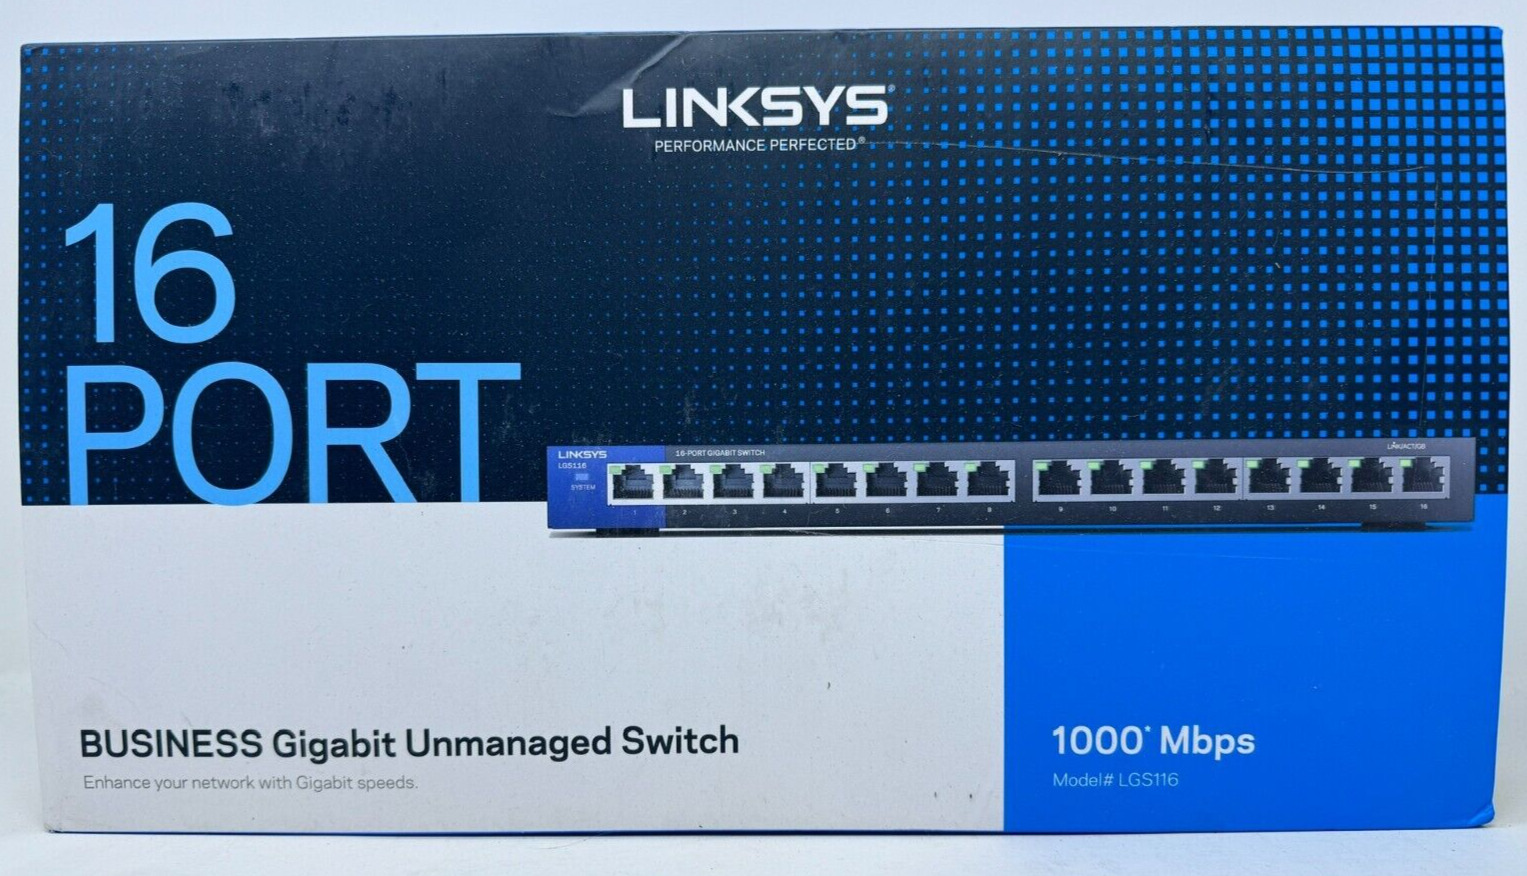 Linksys LGS116 16-Port Business Gigabit Unmanaged Switch 1000 Mbps (ca3)